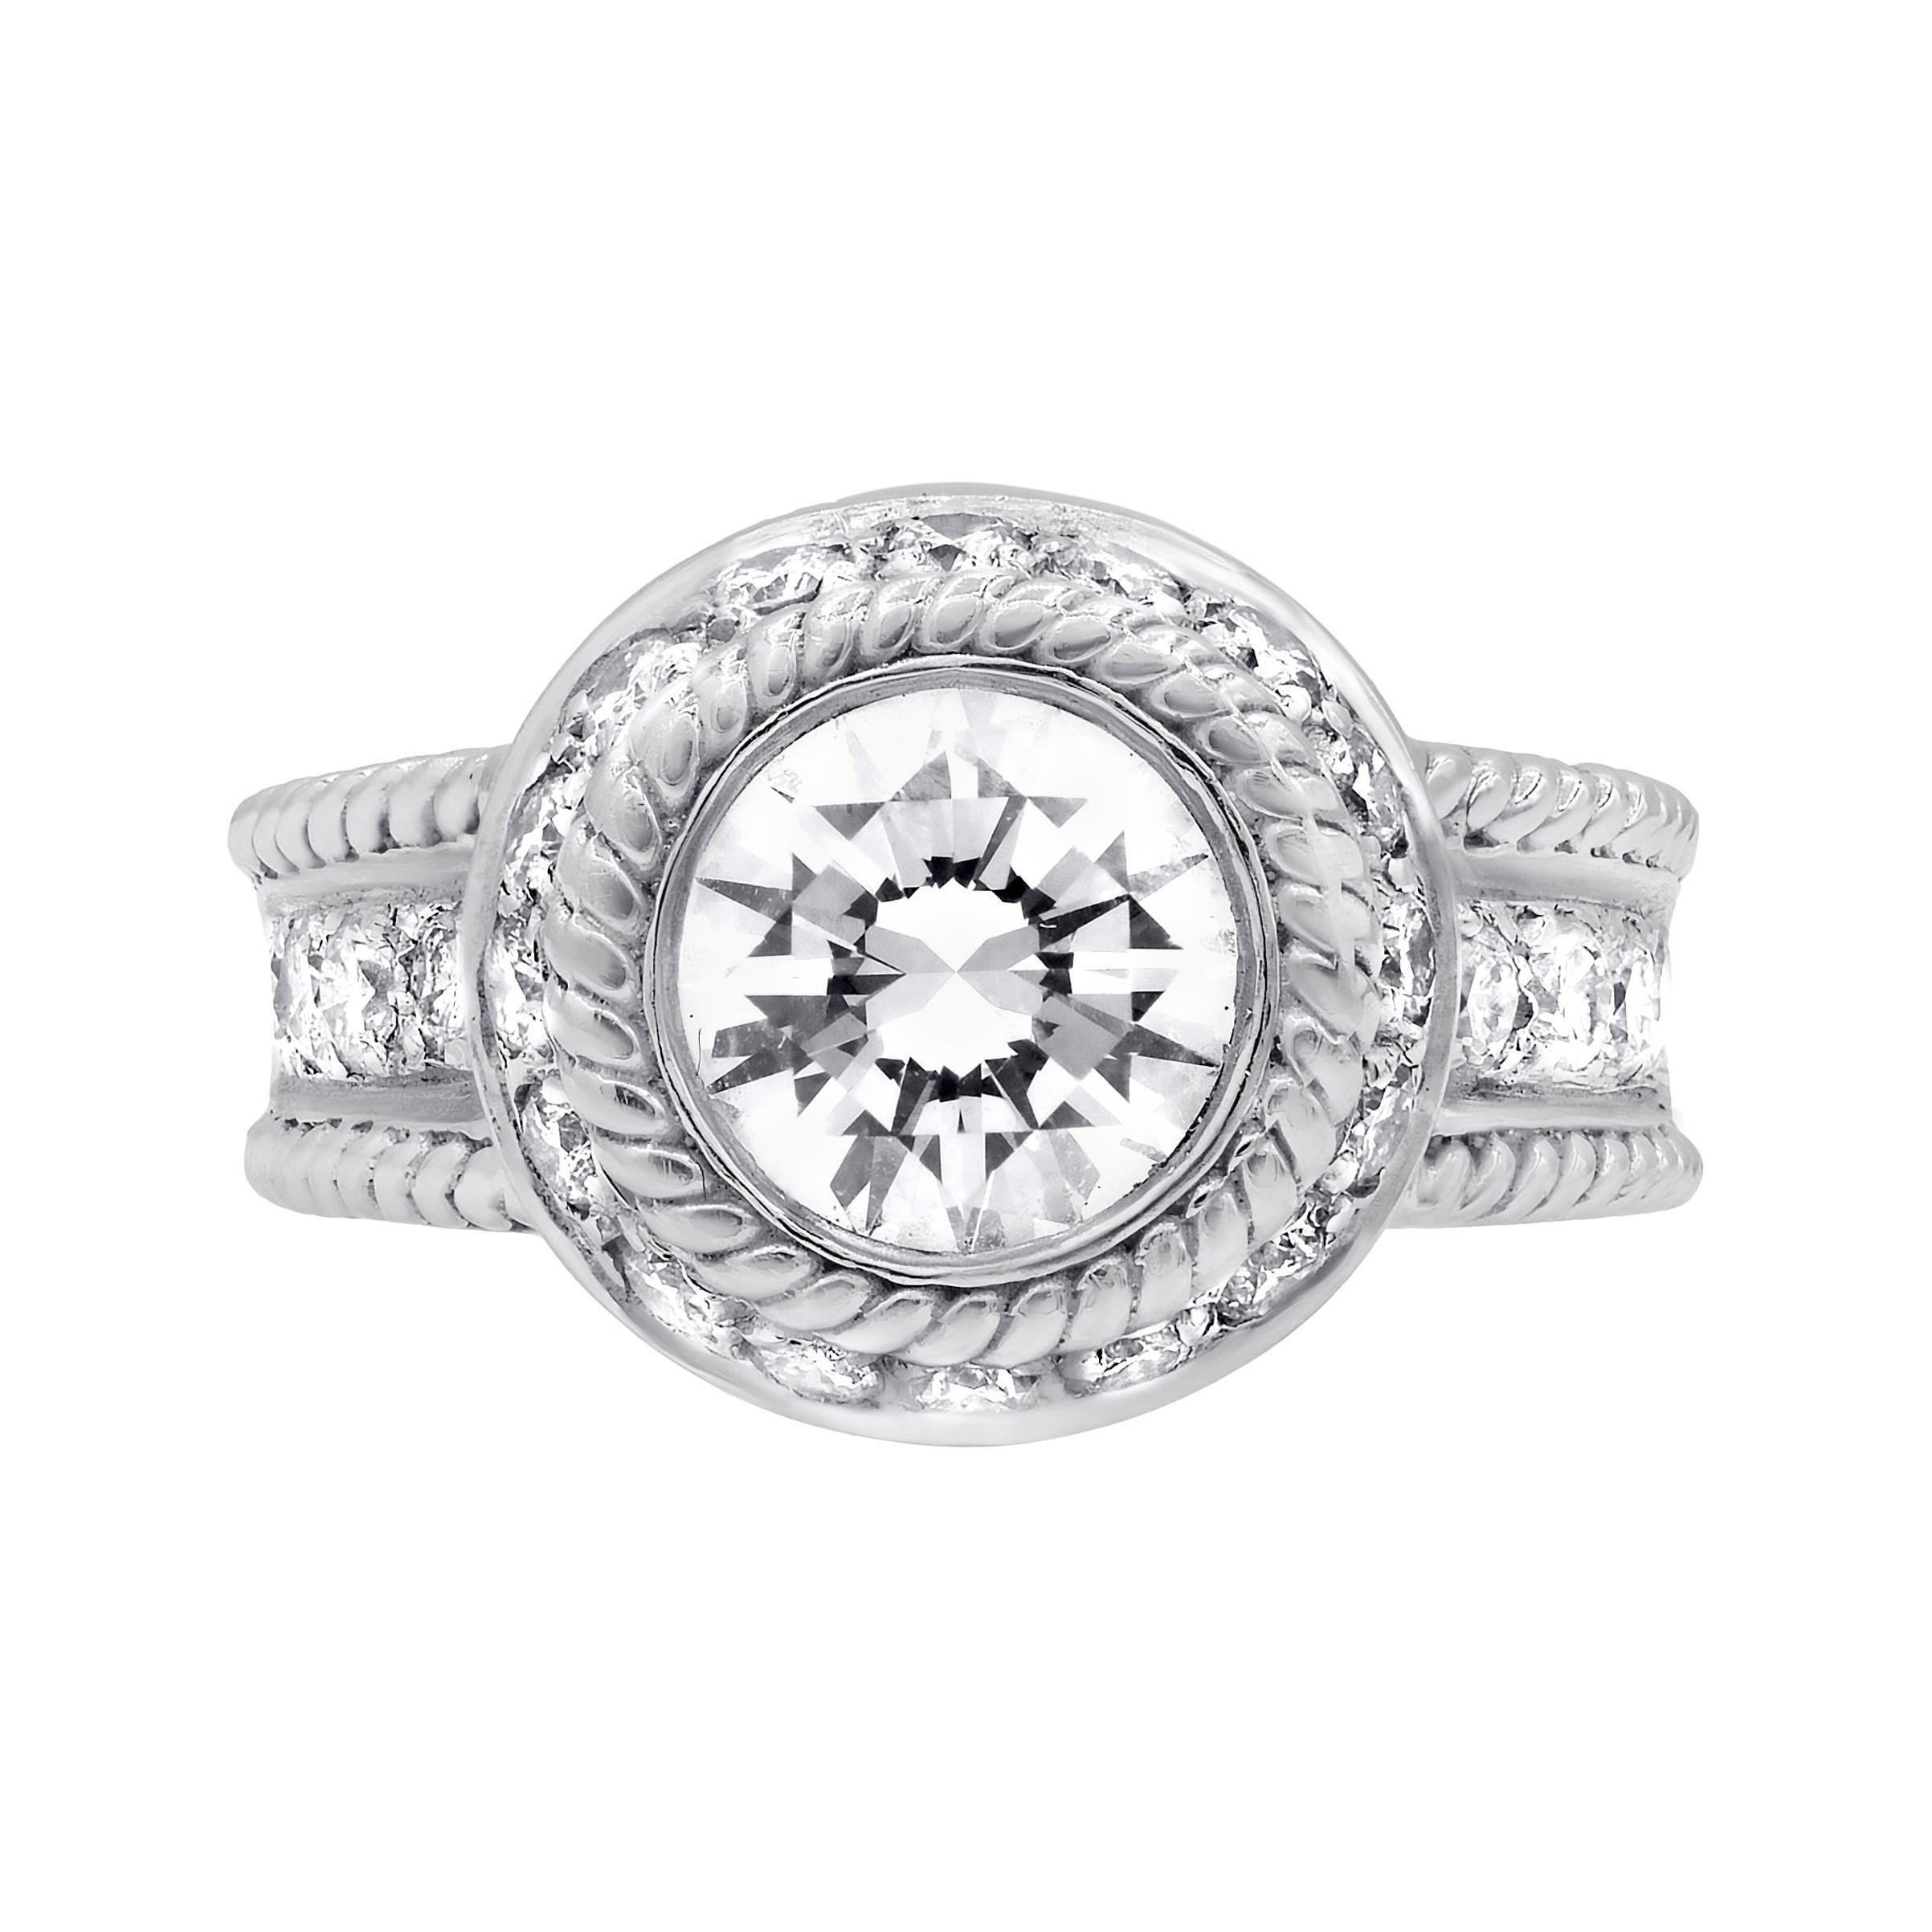 18k White Gold Ring with 1.70 Carat of Round Diamond and 0.93 Carat of Diamonds